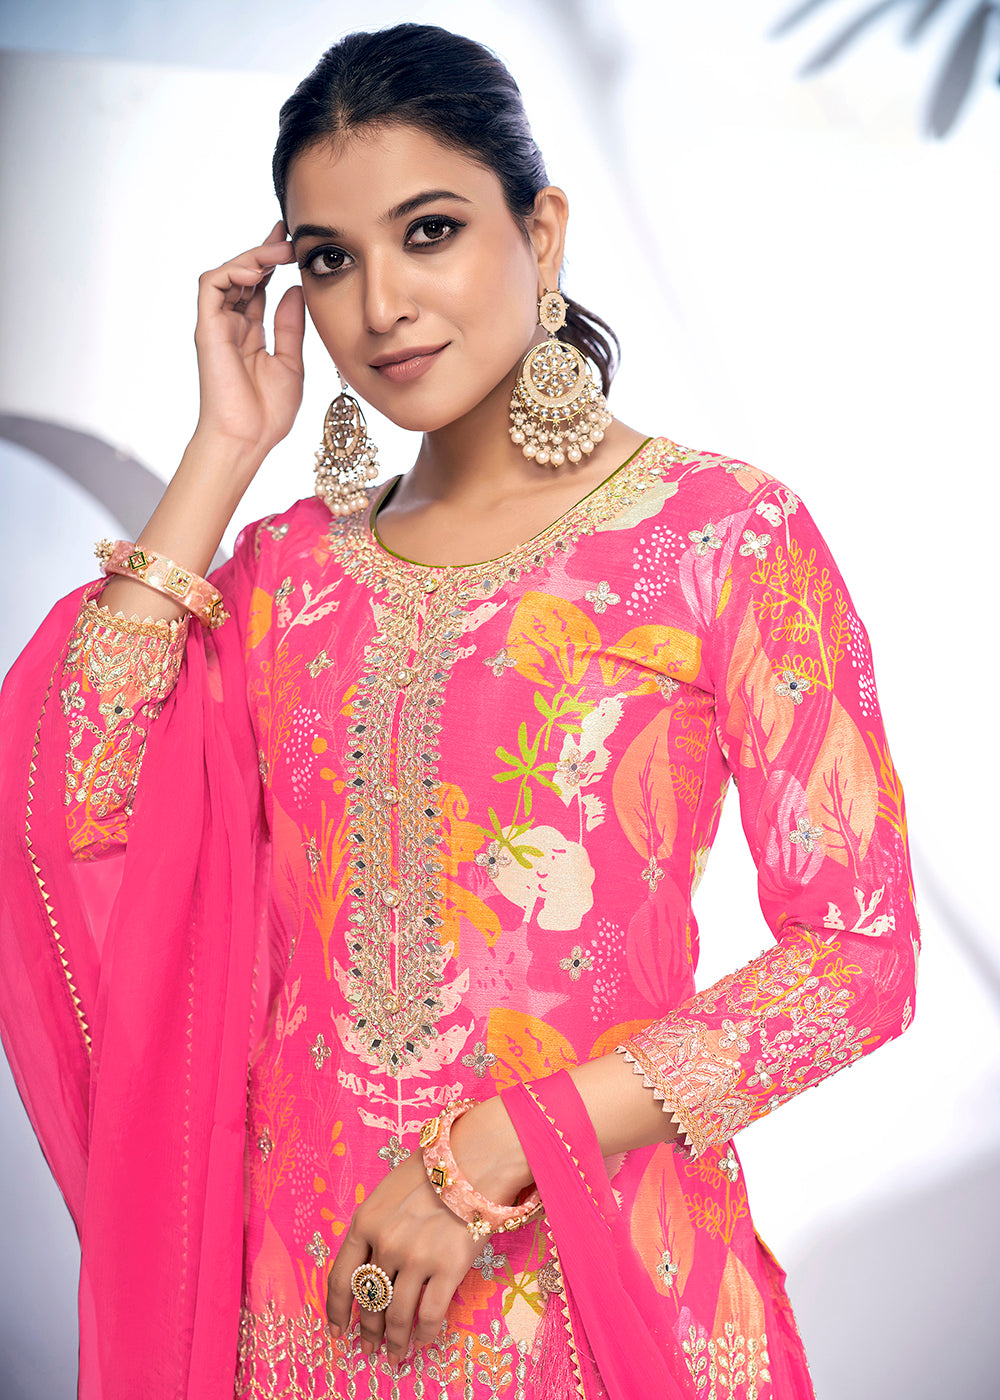 Shop Now Pink Embroidered & Printed Festive Gharara Suit Online at Empress Clothing in USA, UK, Canada, Italy & Worldwide.